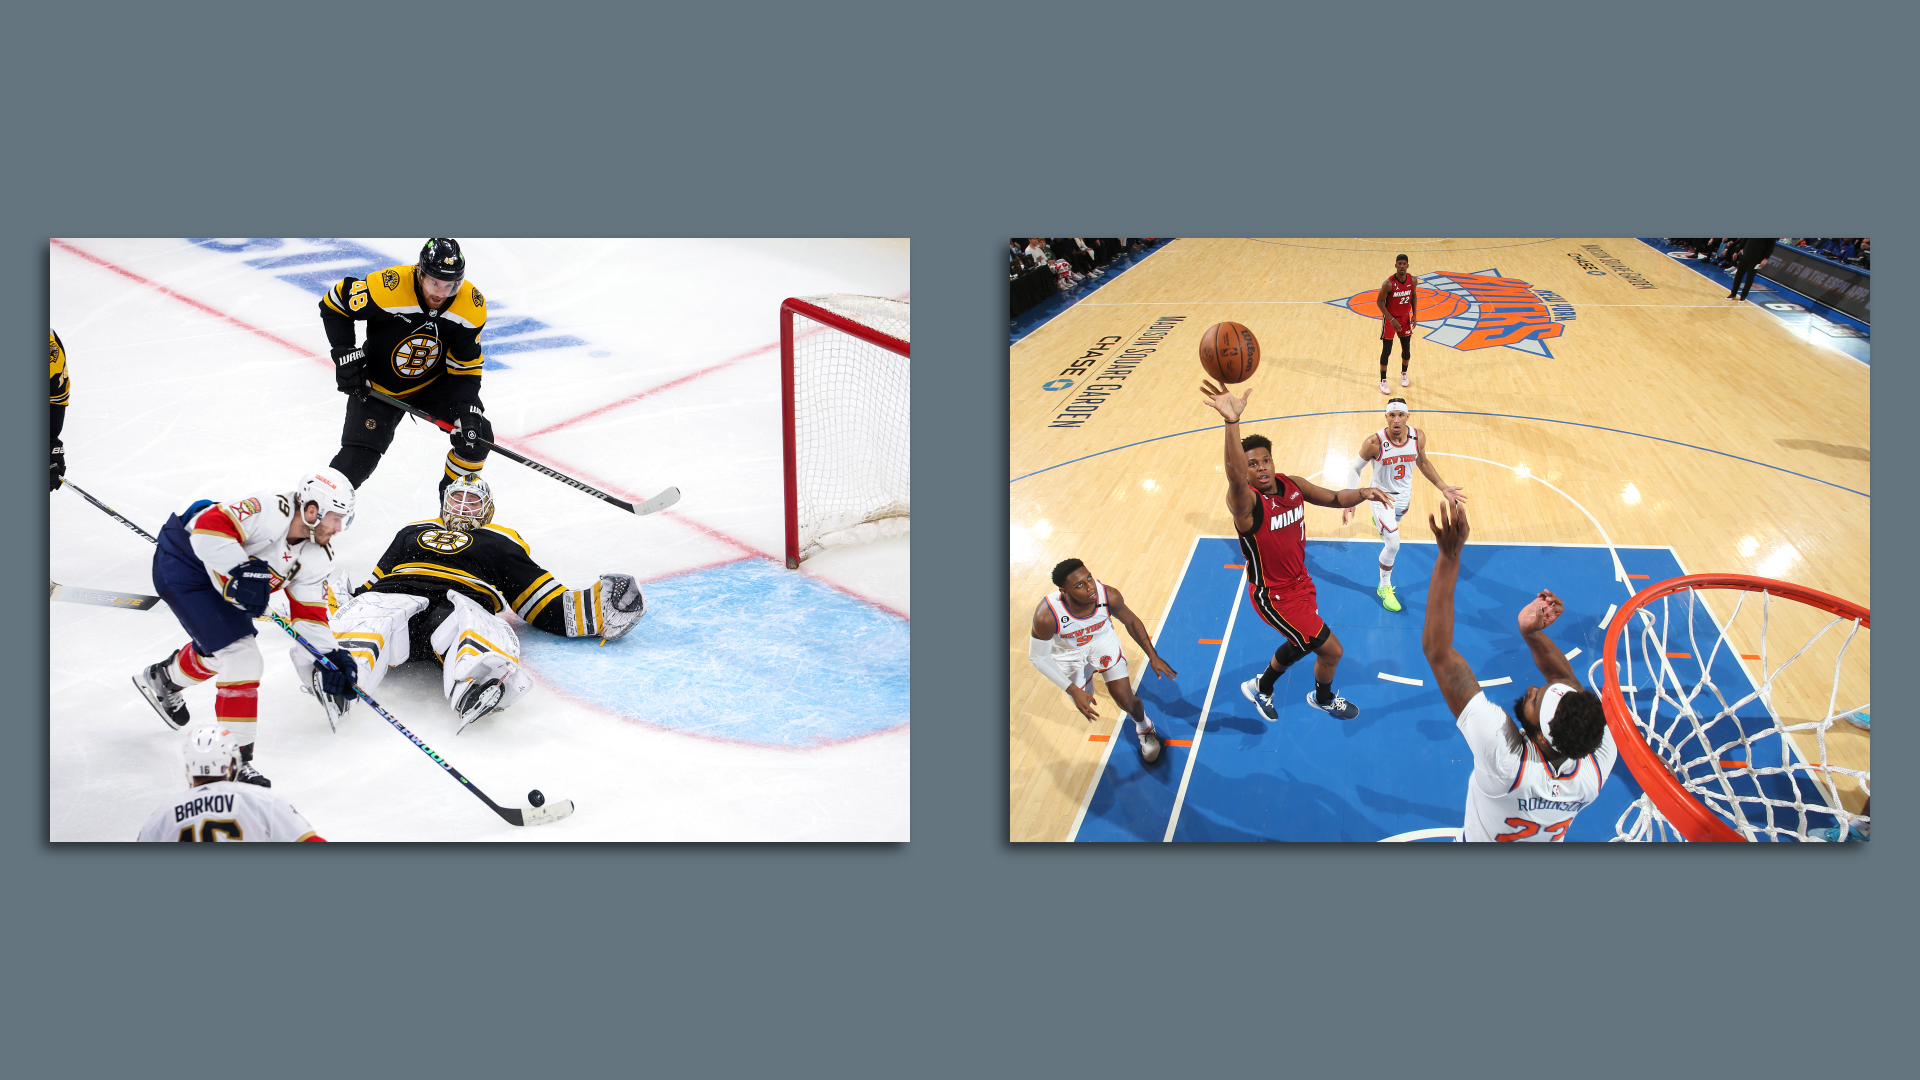 A side-by-side collage shows Florida Panthers LW Matthew Tkachuk shooting a wide-open goal and Heat guard Kyle Lowry shooting a floater, both in their first-round playoff matchups